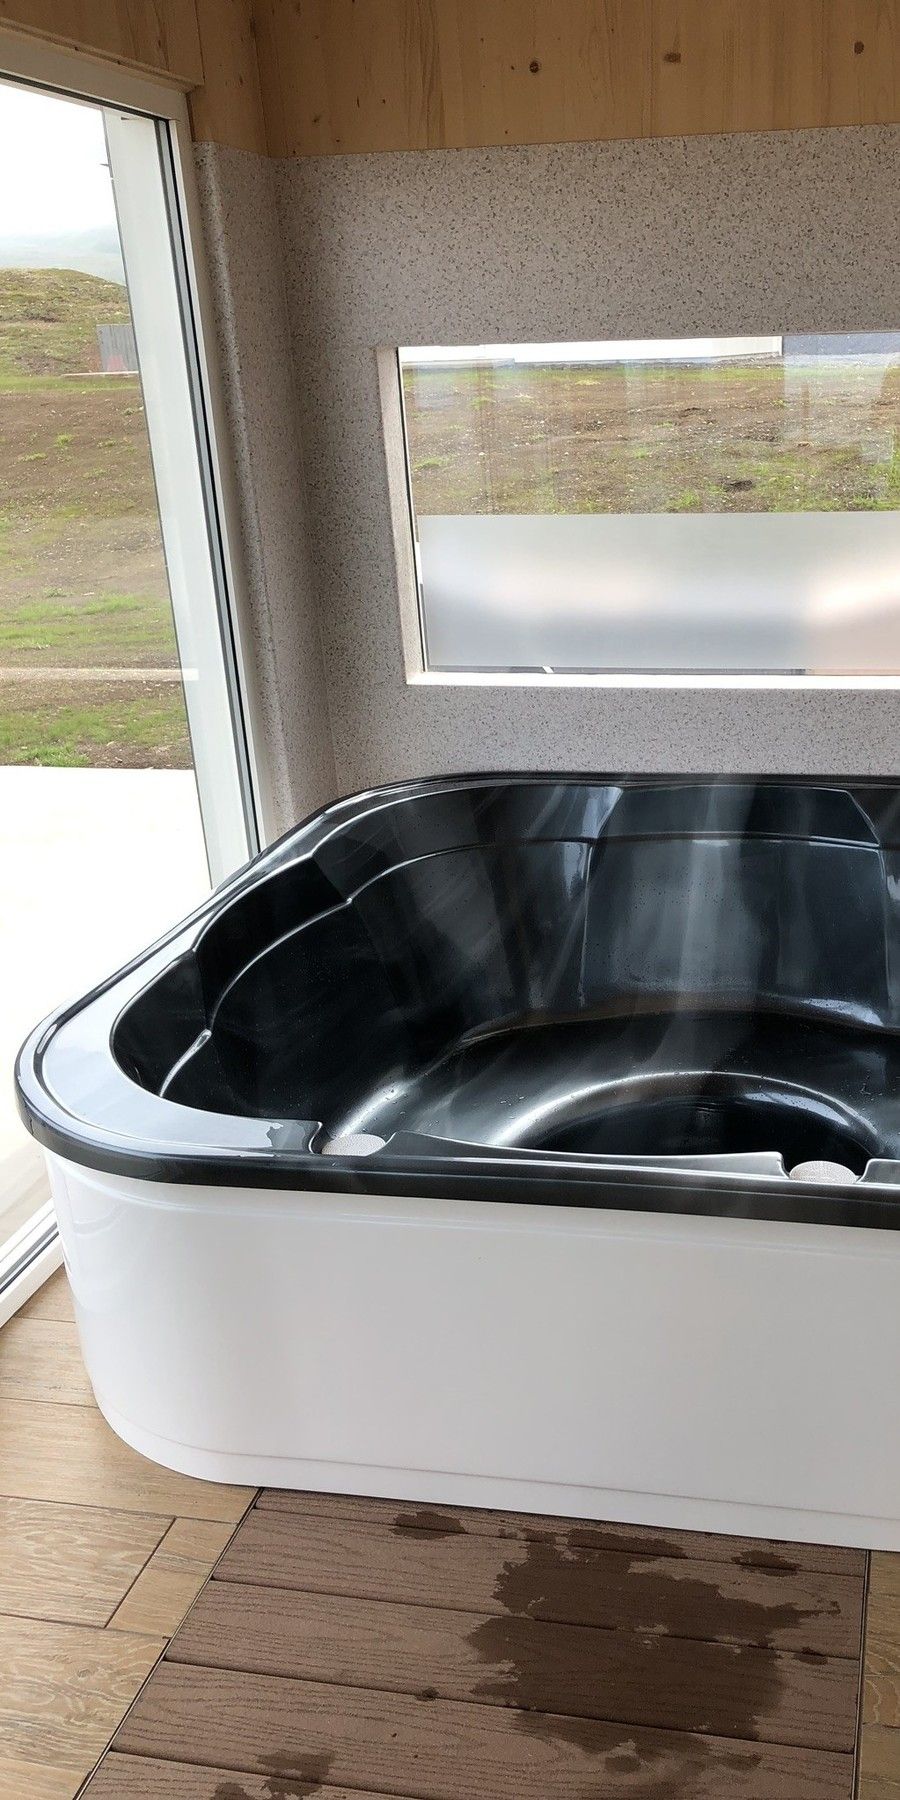 The private hot tub is protected from view and the weather